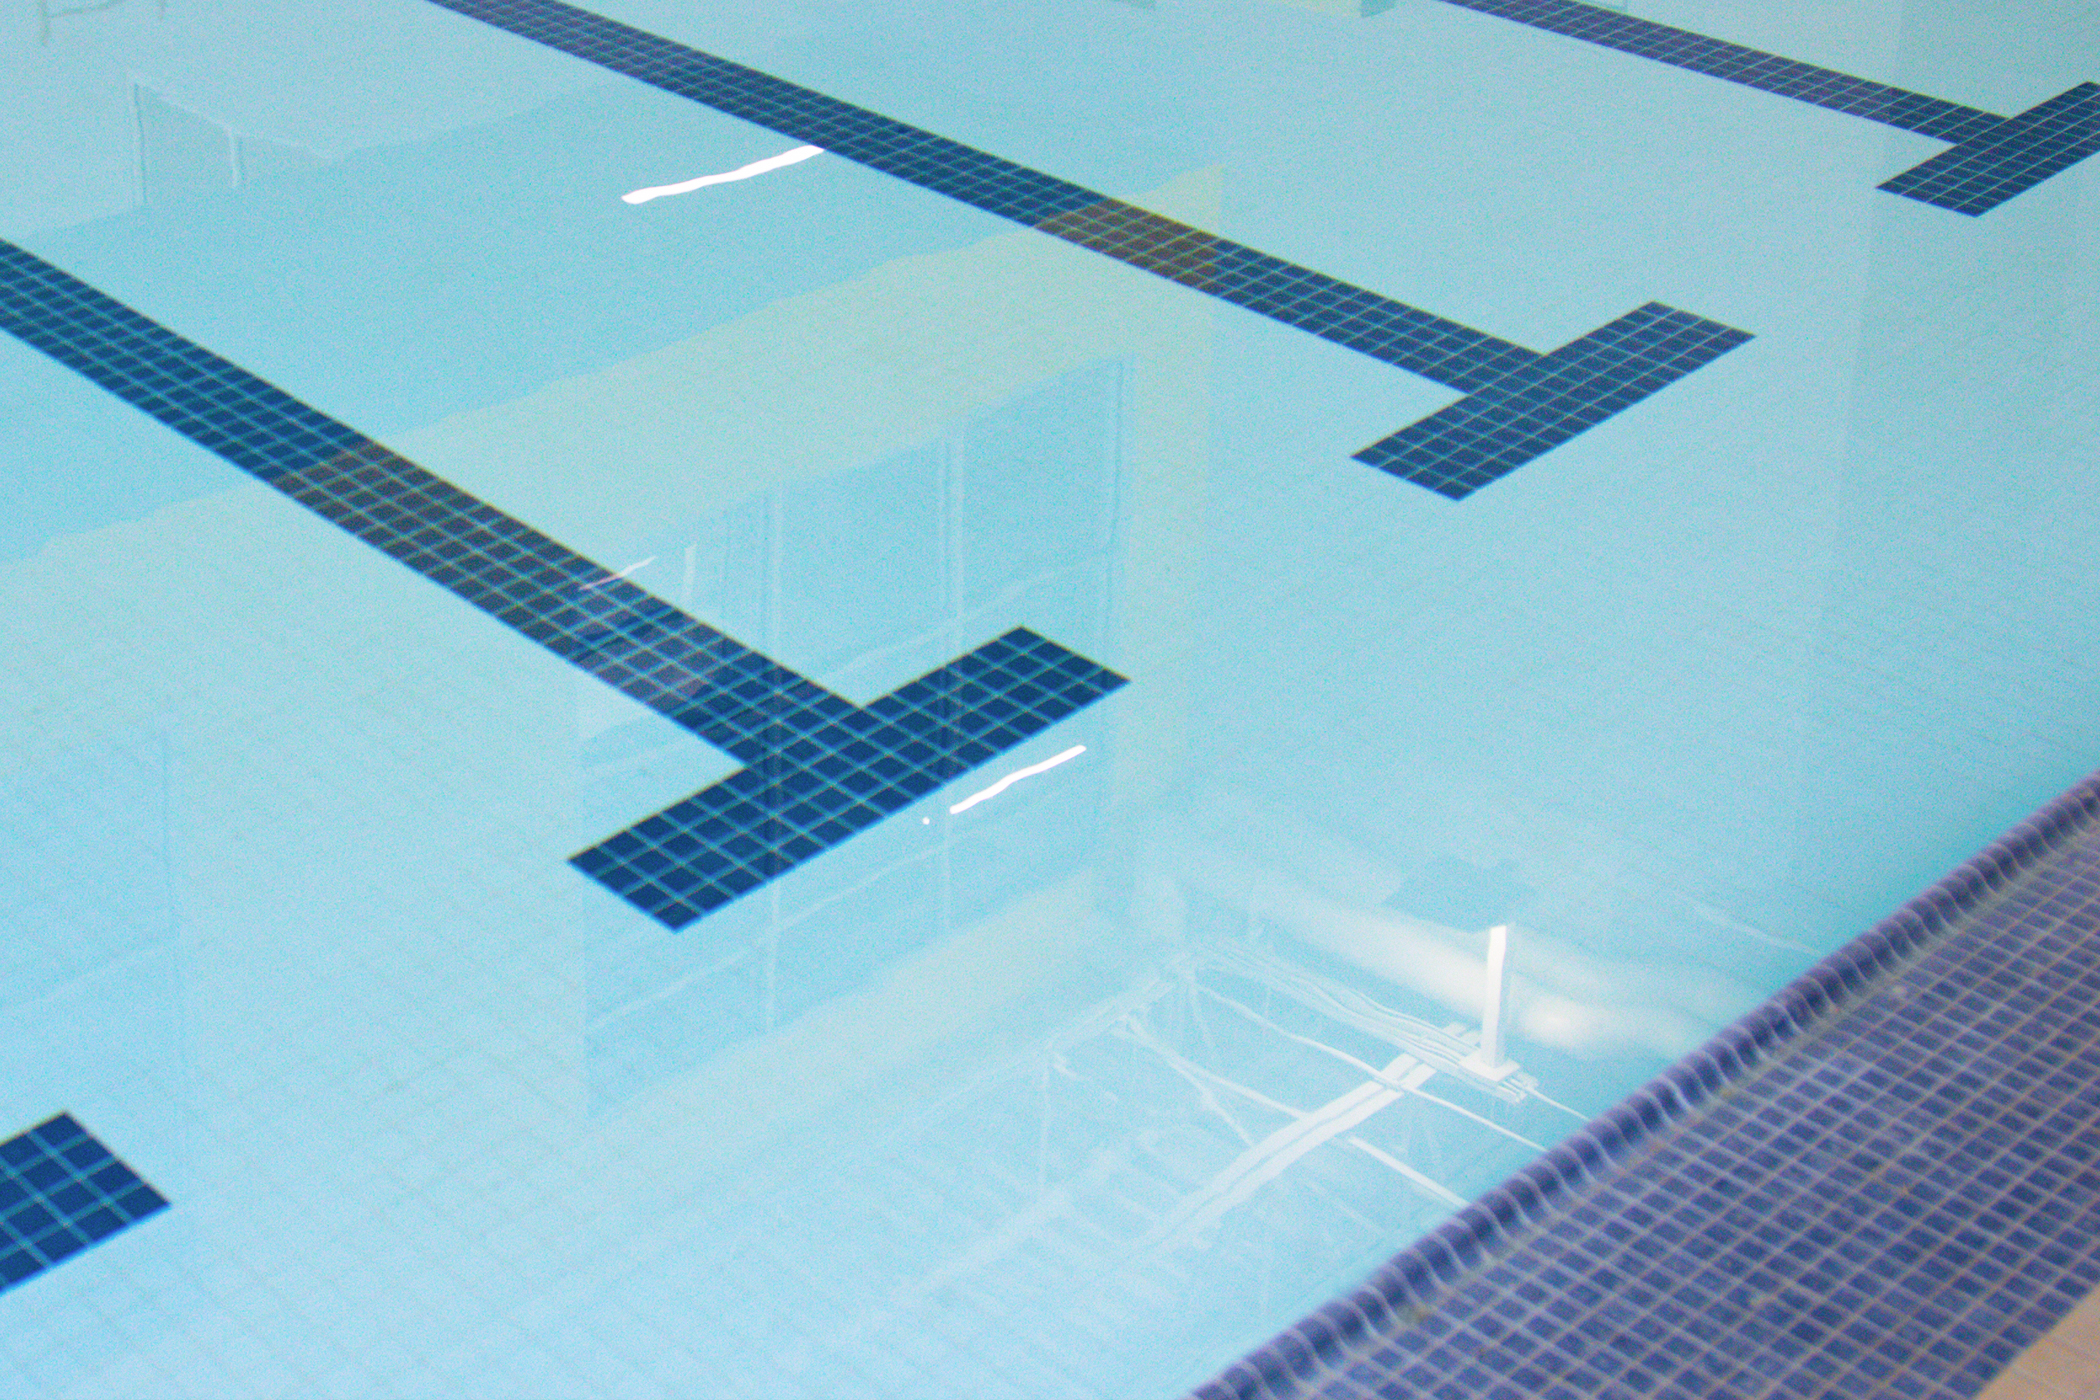 Side of the pool, with underwater lines visible